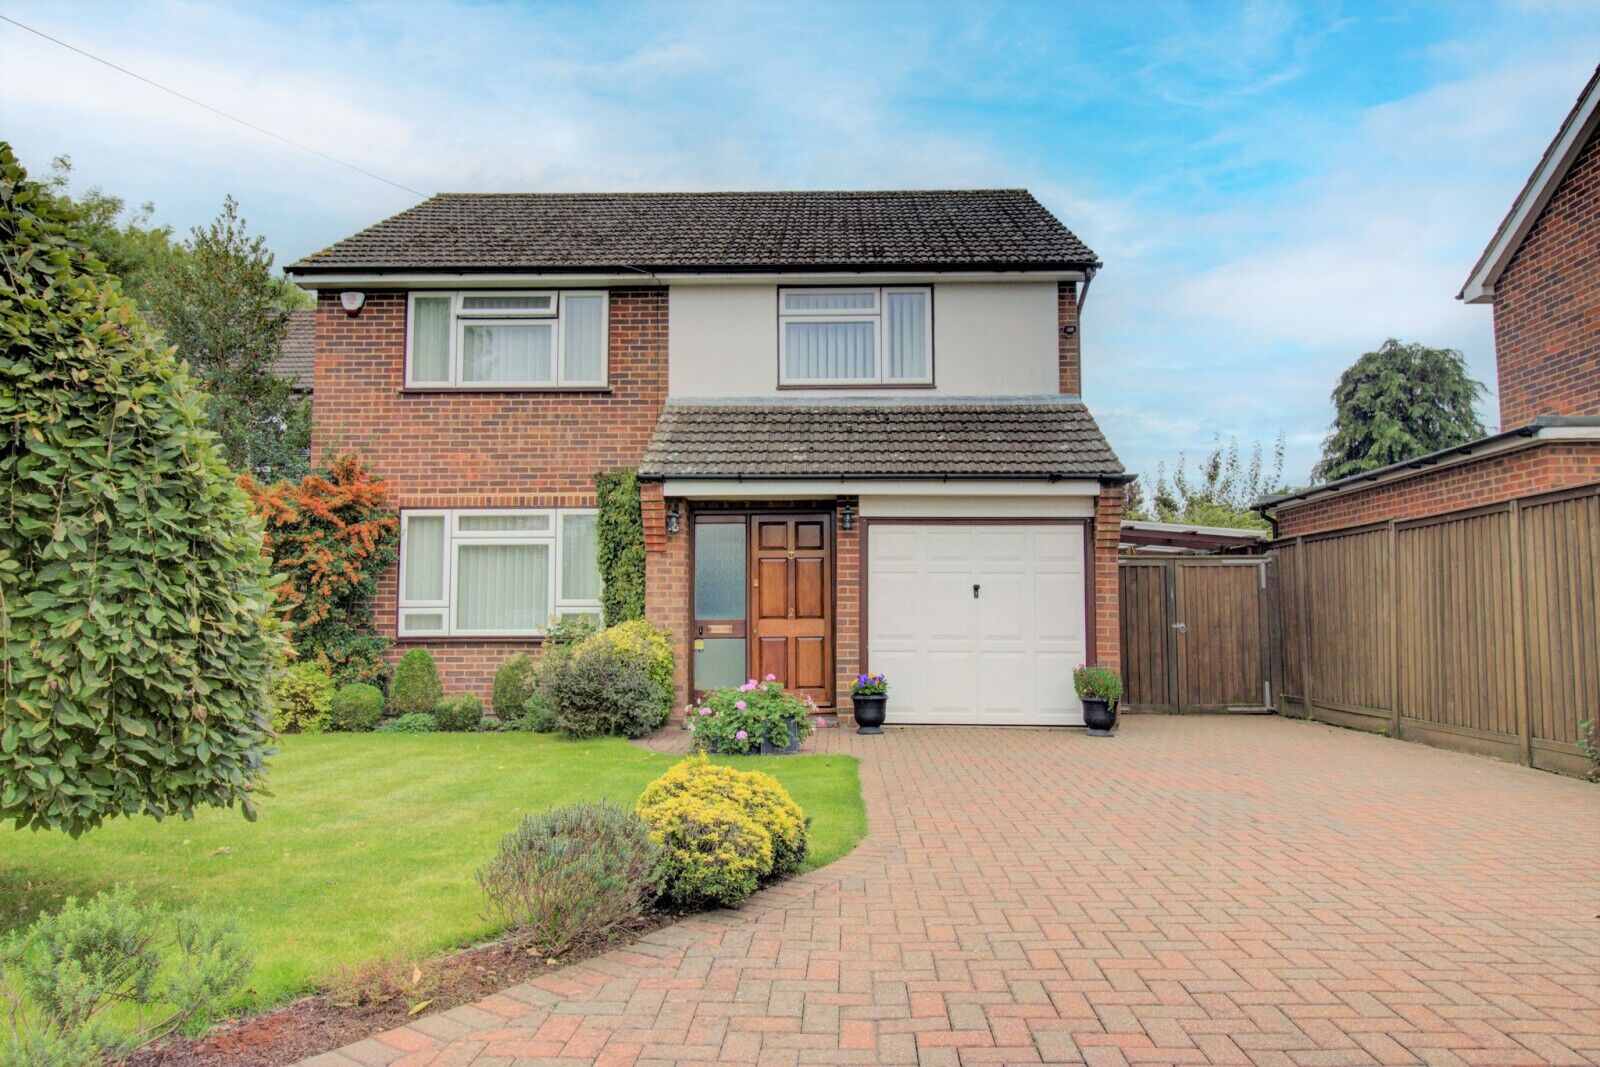 4 bedroom detached house for sale Hoppers Way, Great Kingshill, HP15, main image